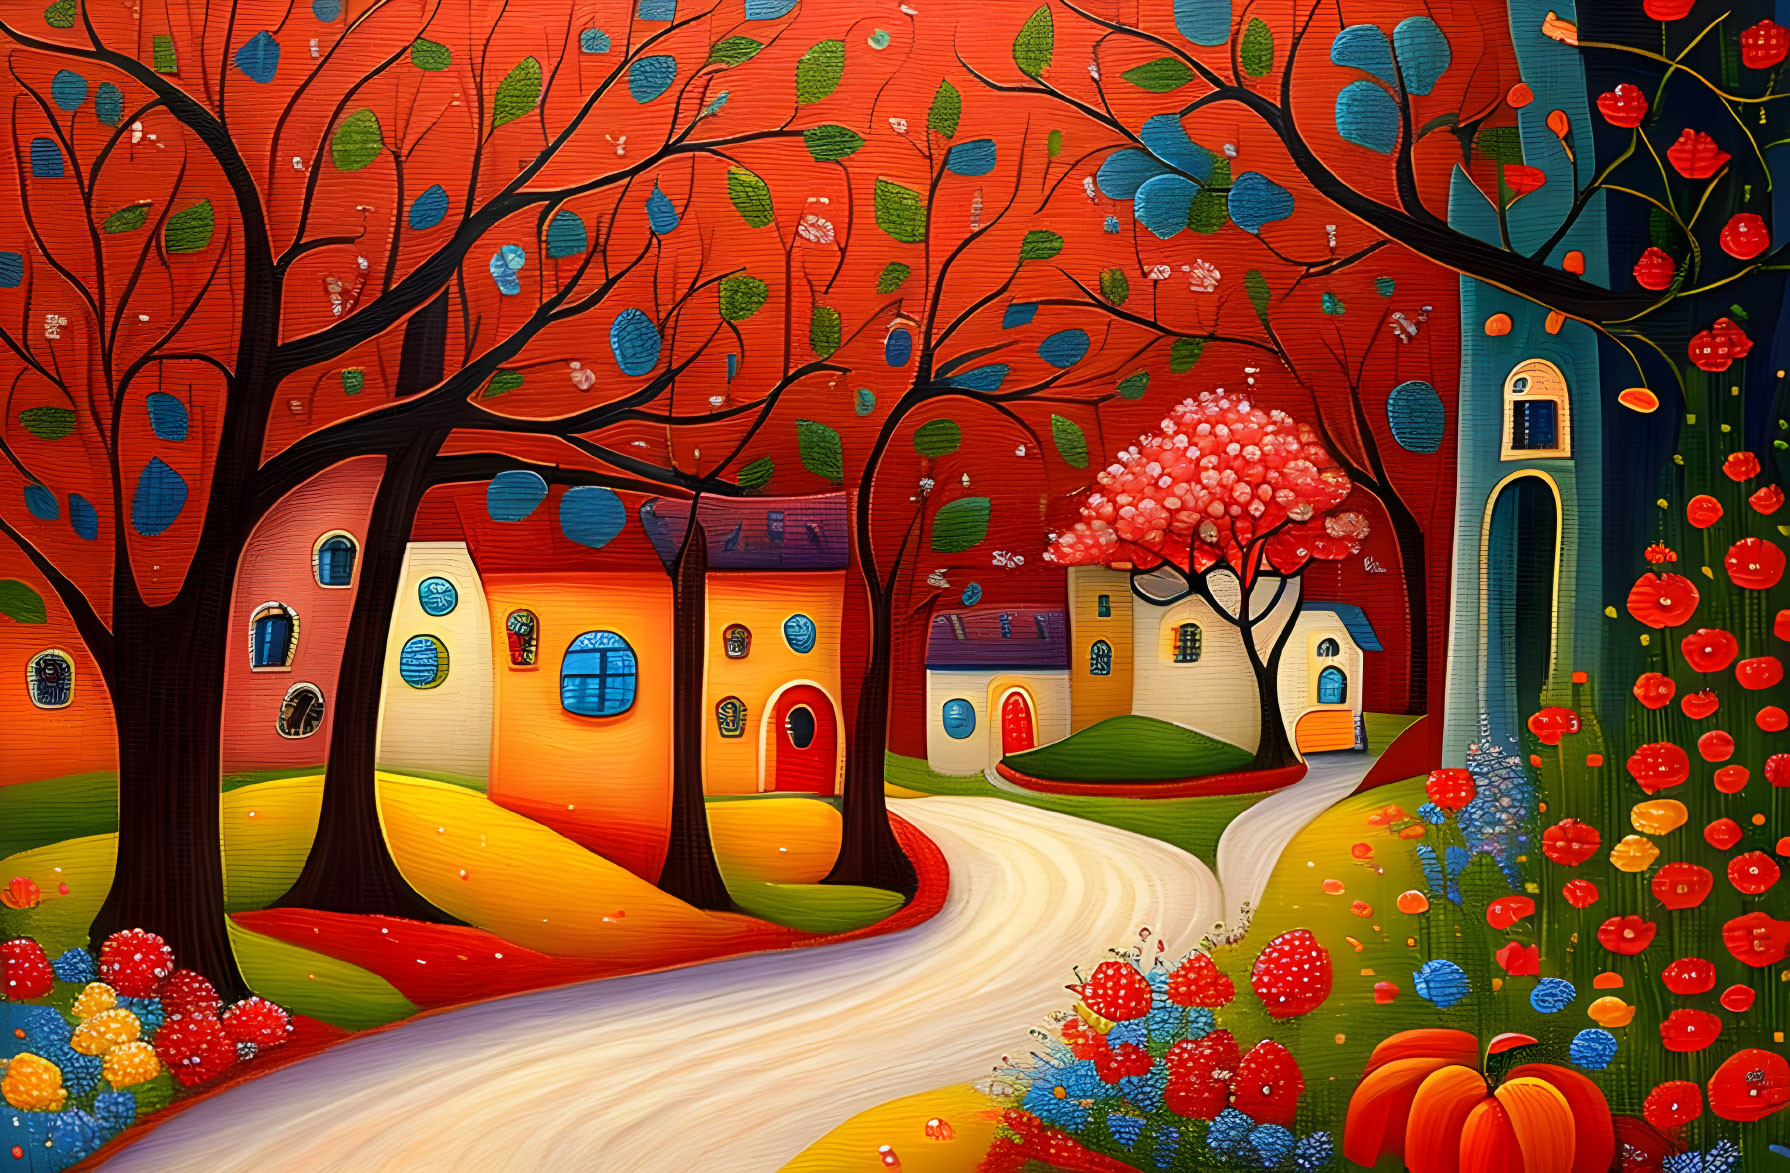 Colorful forest painting with stylized trees, cottages, path, and bright flora